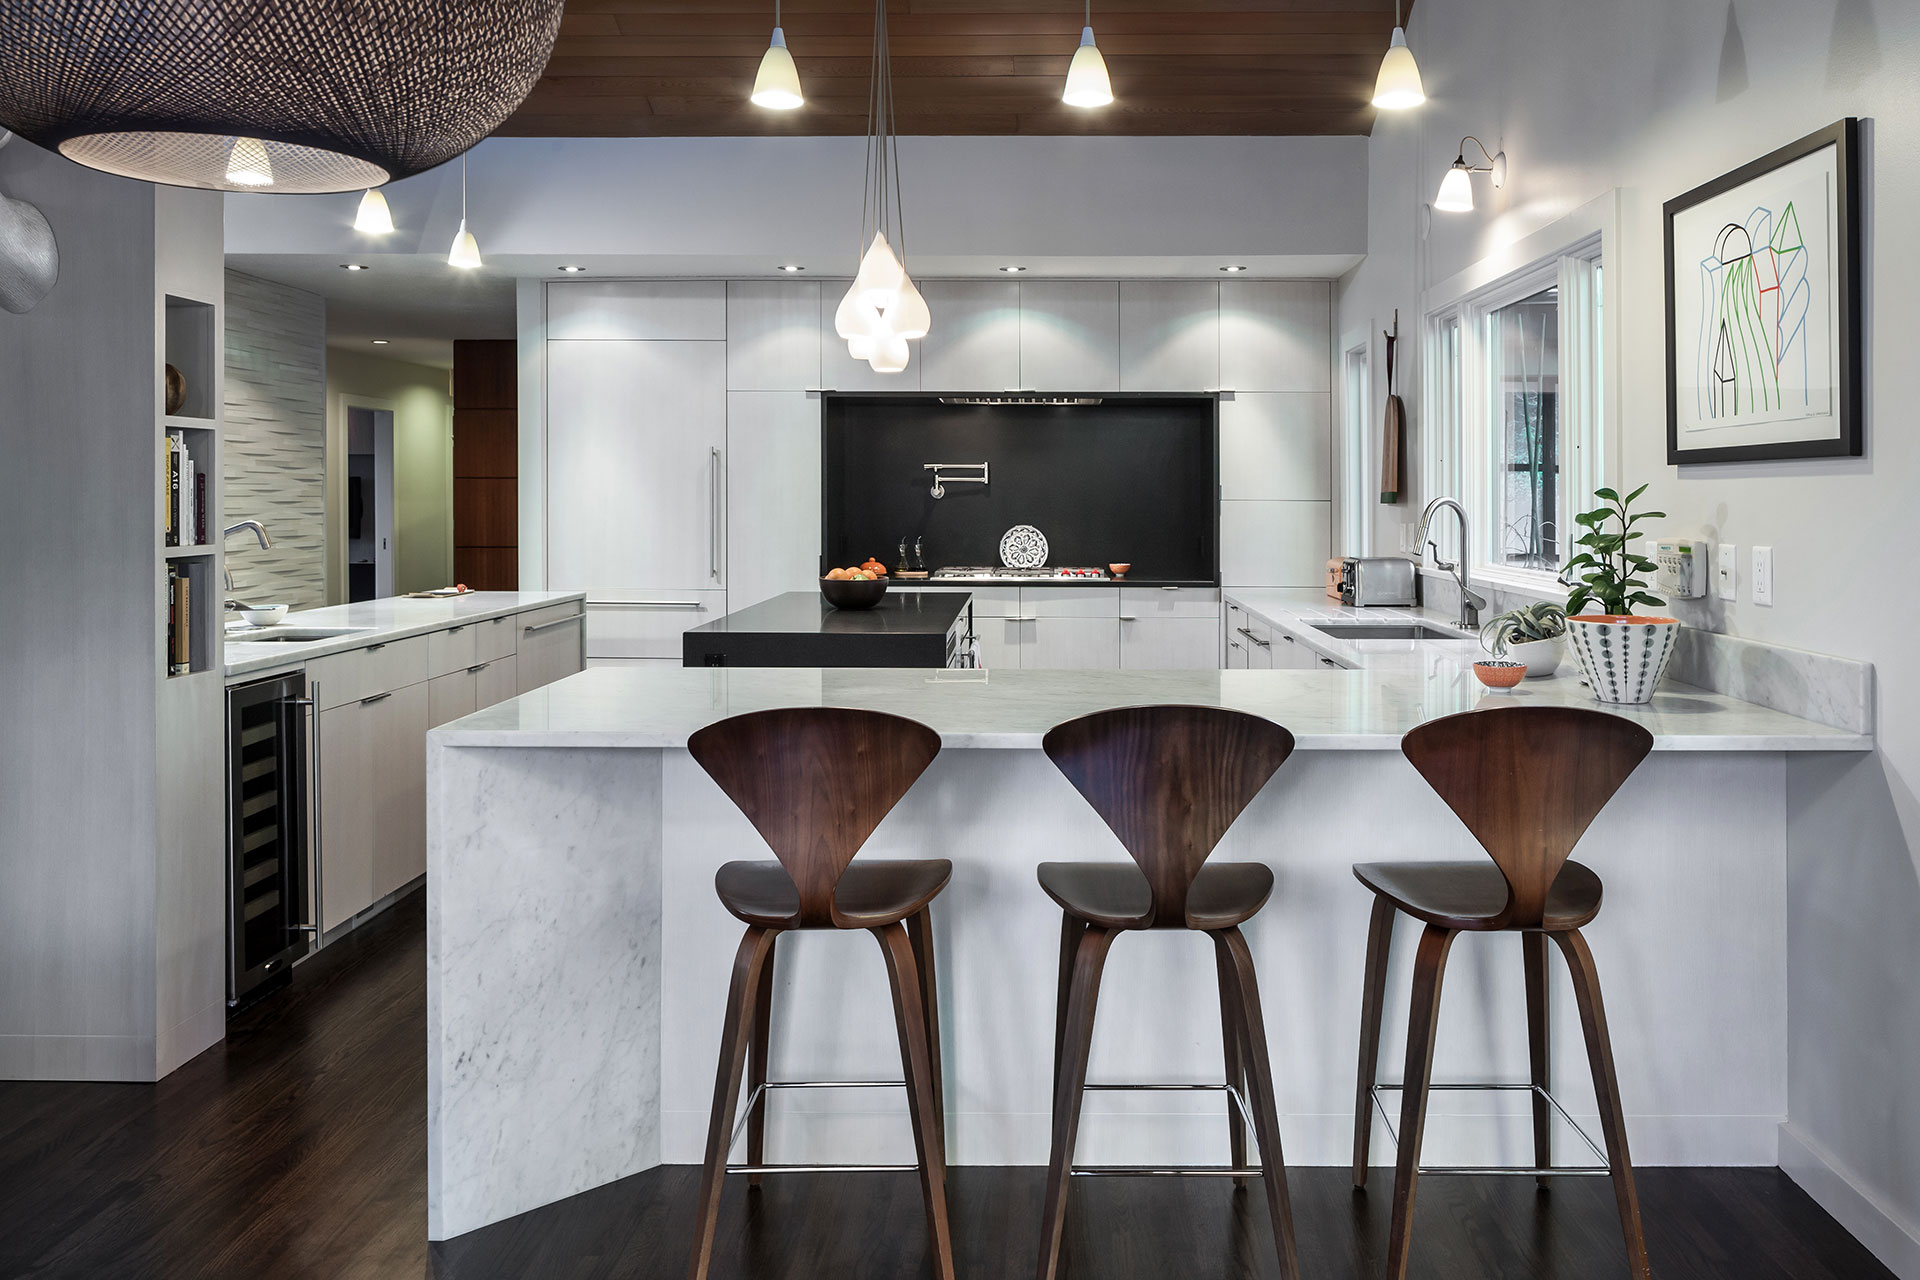 Carrara marble forms a kitchen peninsula with space for three walnut Cherner chairs in this mid-century modern remodel.